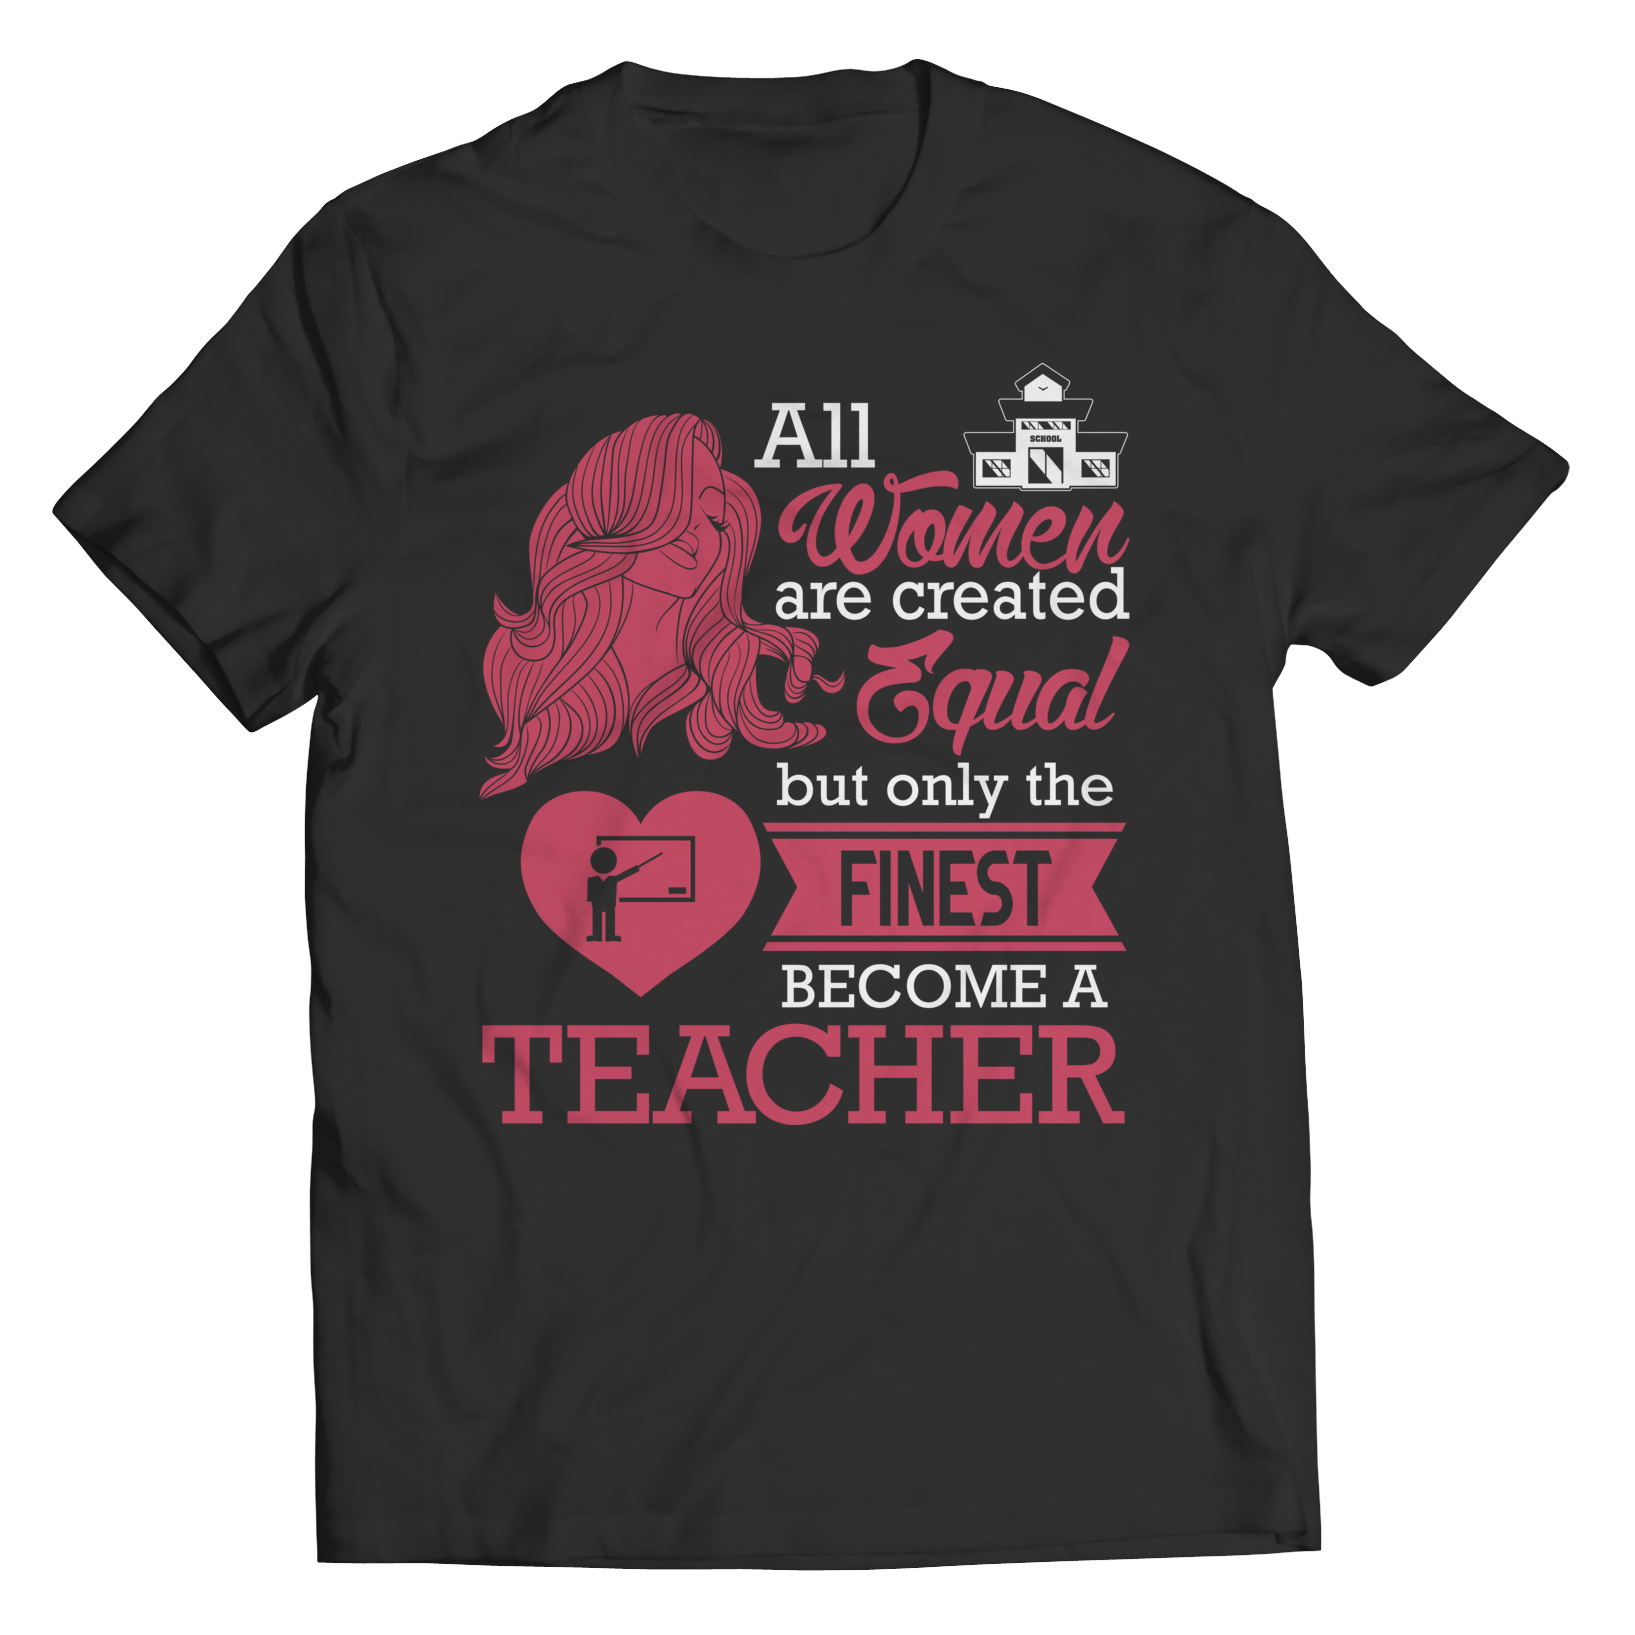 Limited Edition - All Women Are Created Equal But The Finest Become A Teacher Shirt